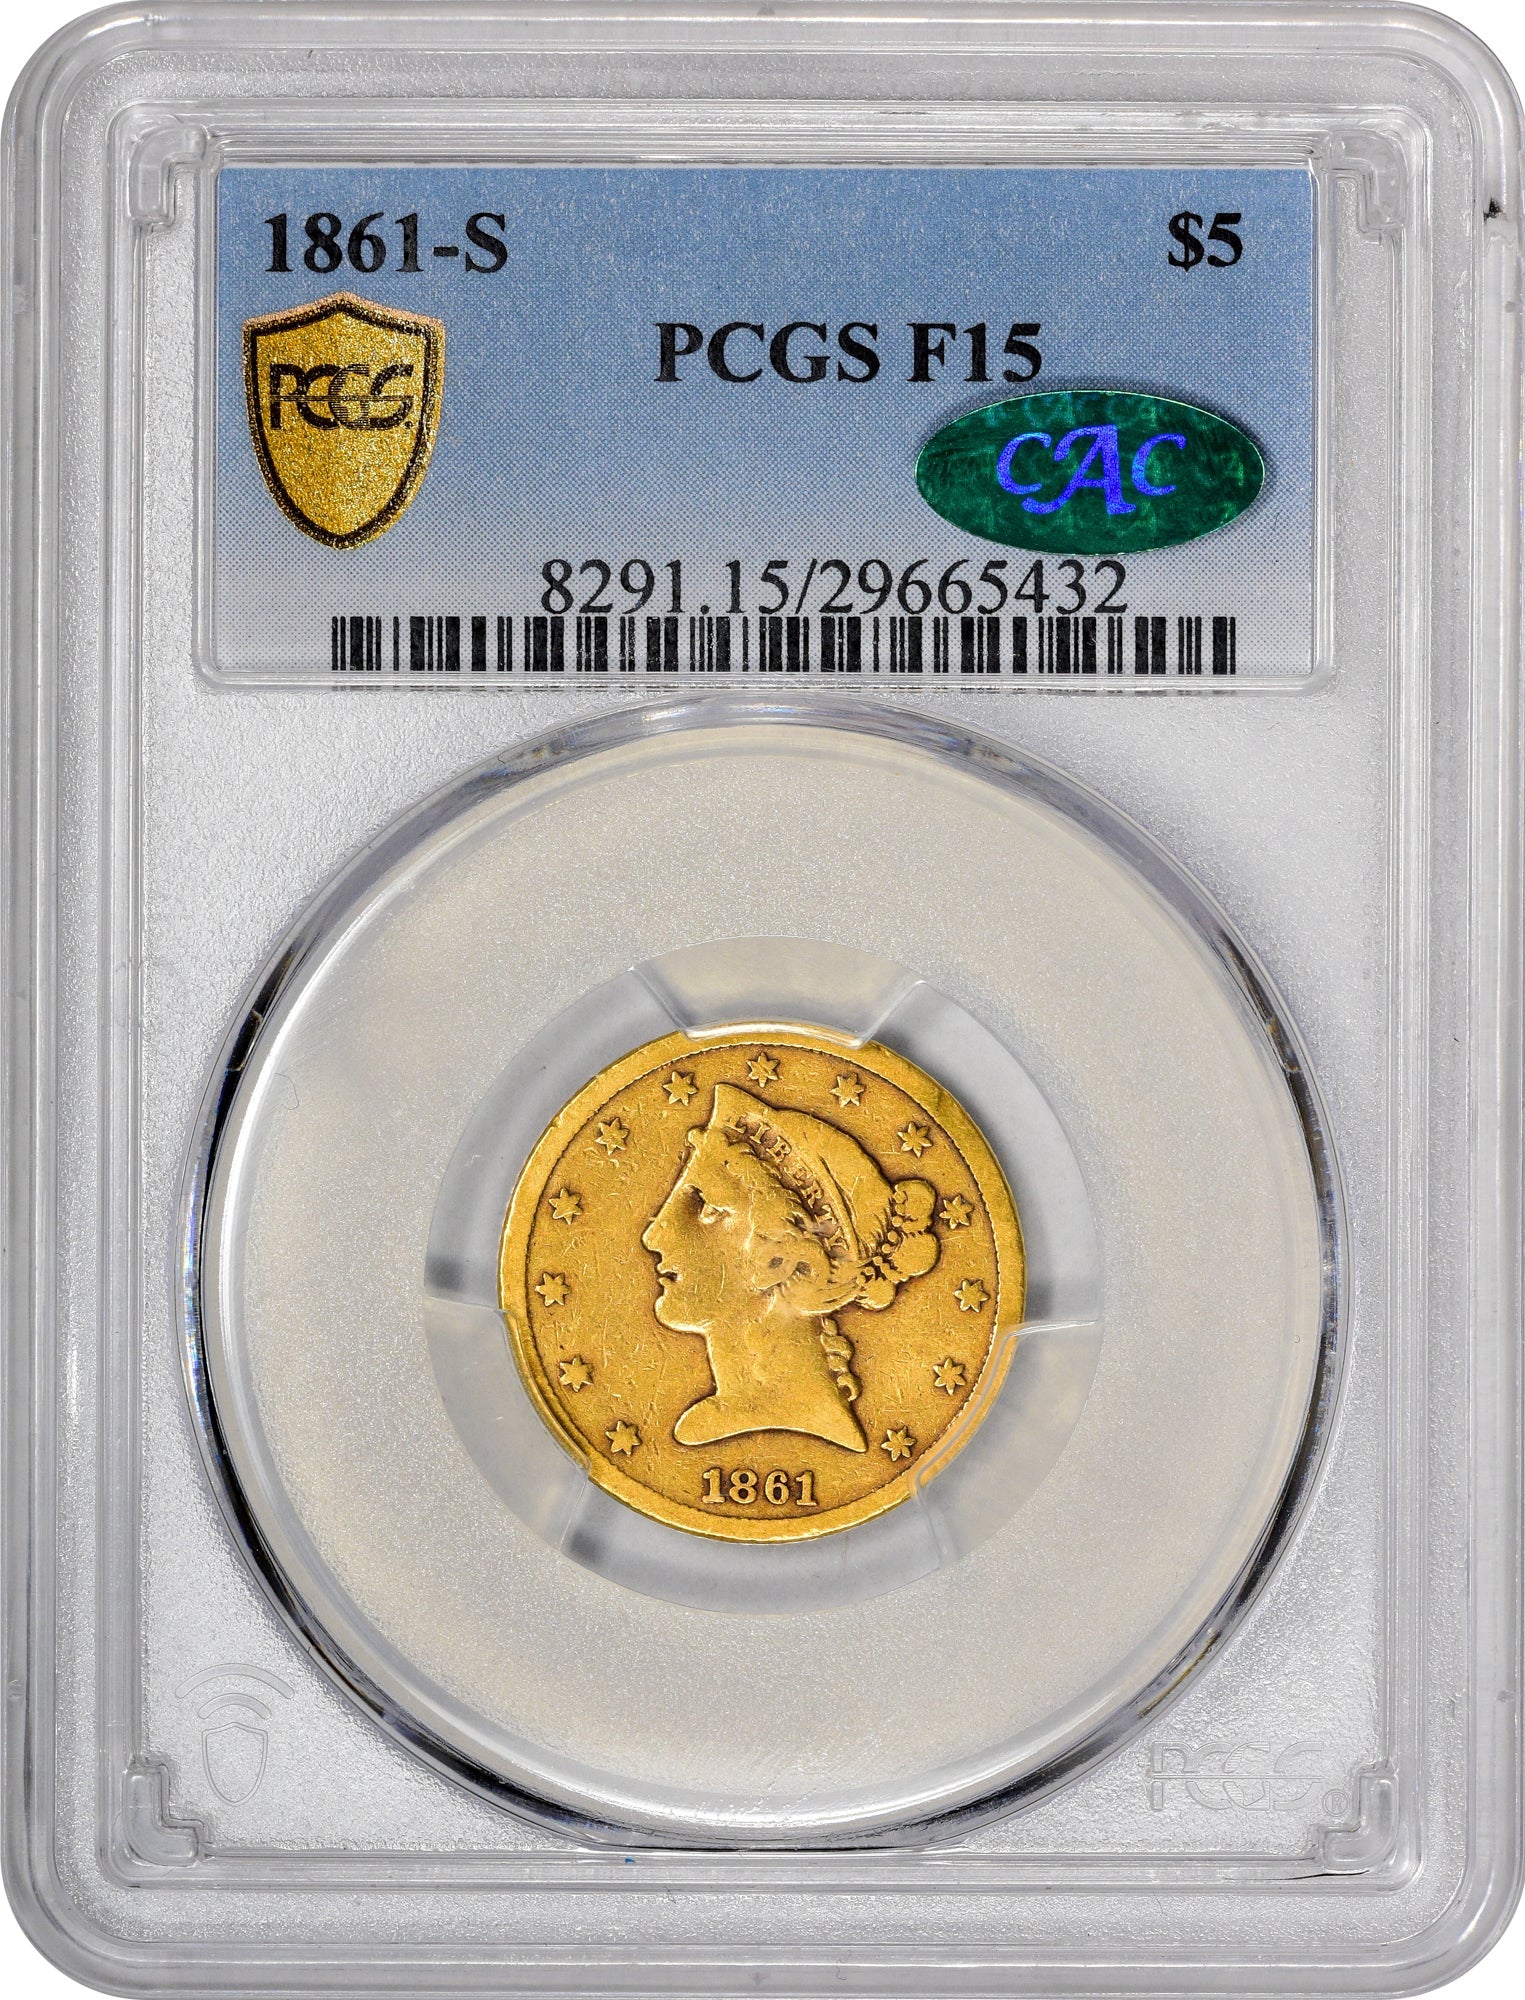 1861-S $5 F15 PCGS CAC - Paradime Coins | PCGS NGC CACG CAC Rare US Numismatic Coins For Sale